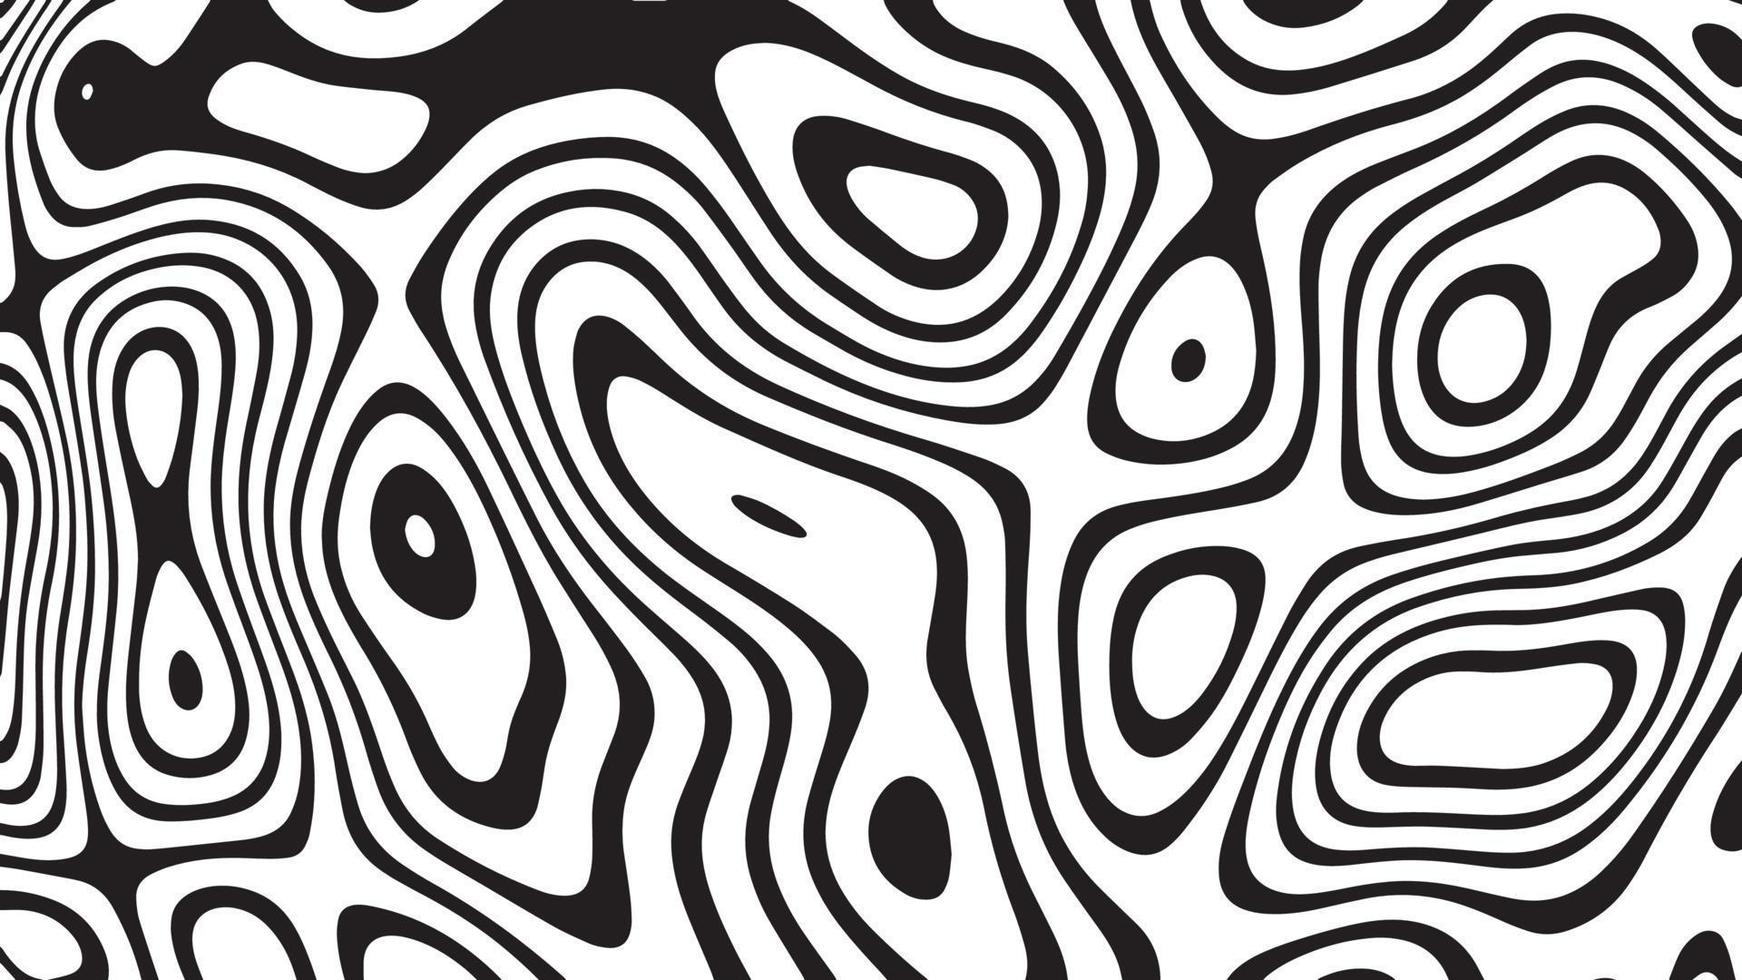 Black and white line pattern abstract background texture vector